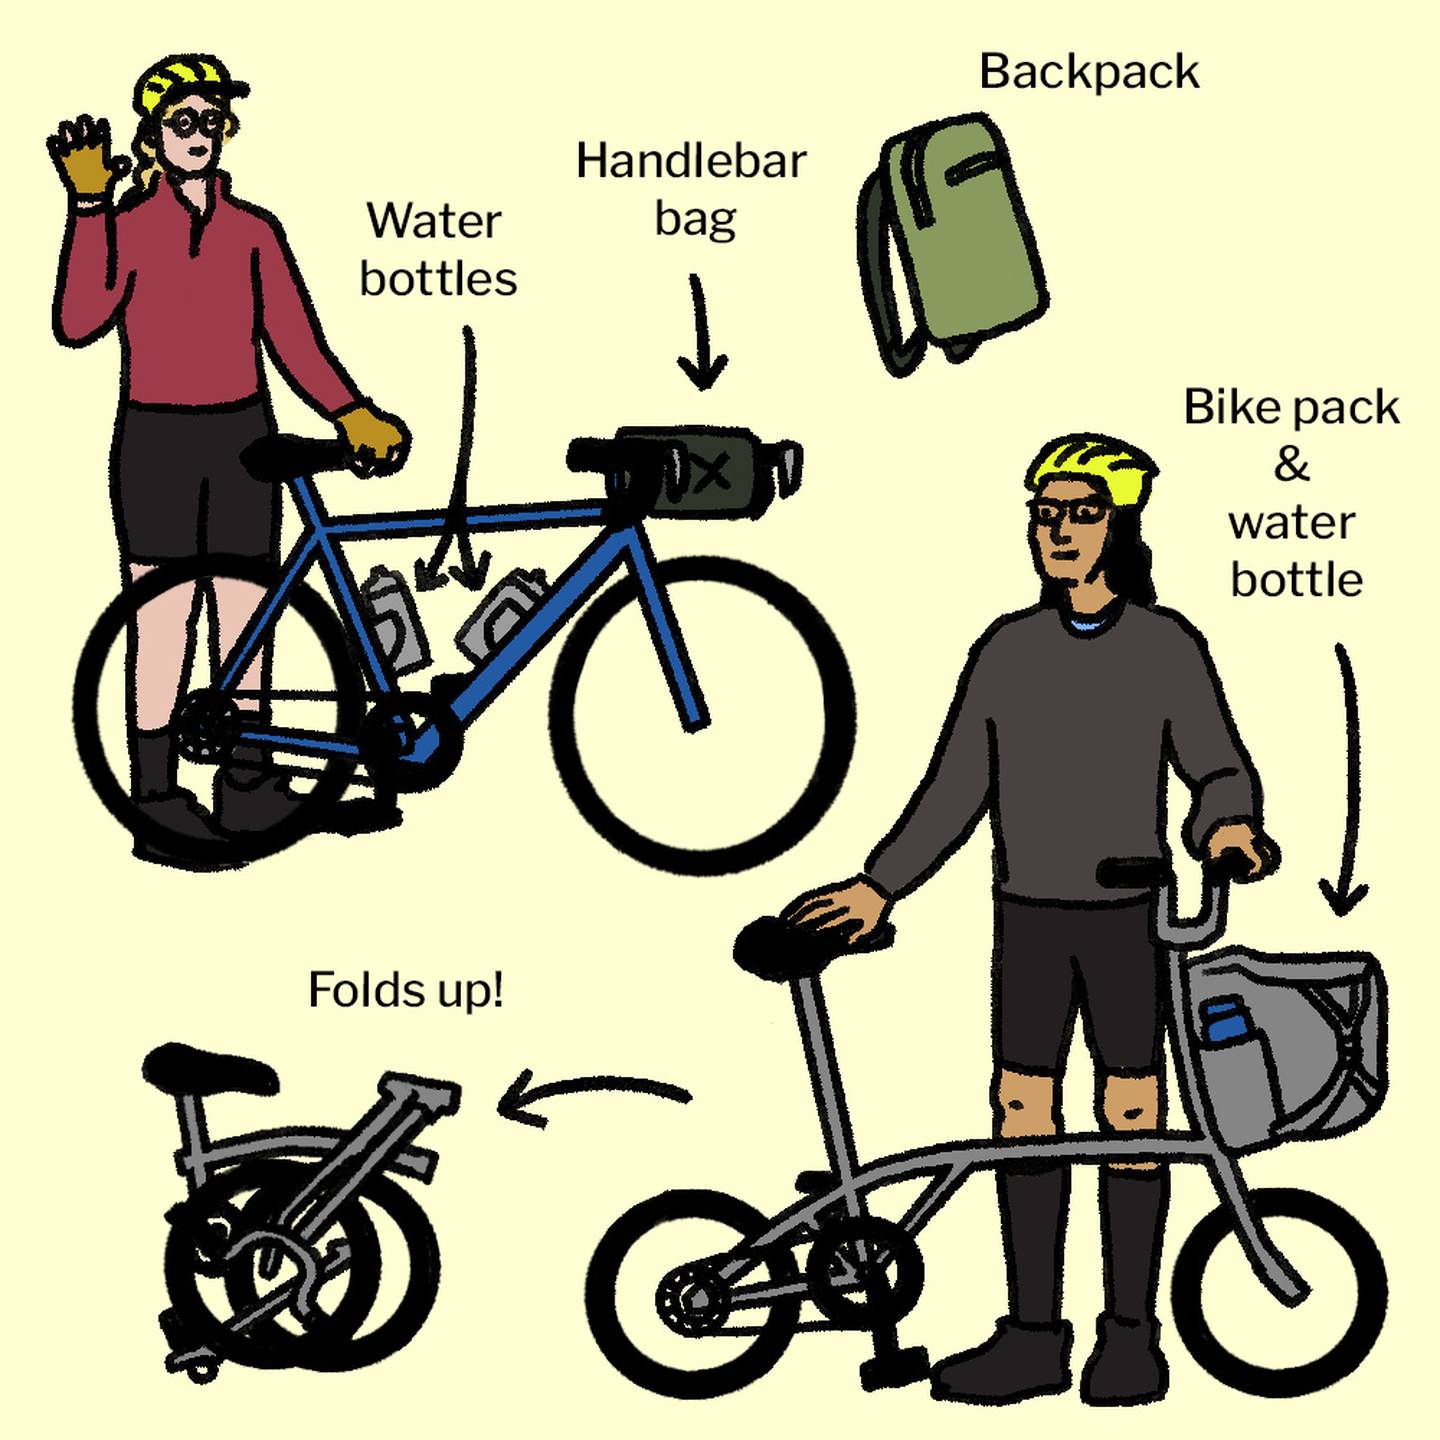 Illustration shows woman with helmet waving and standing next to blue road bike that has handlebar bag and two water bottles on its frame. A man with a helmet stands next to a gray Brompton bike with a front-loading bag.